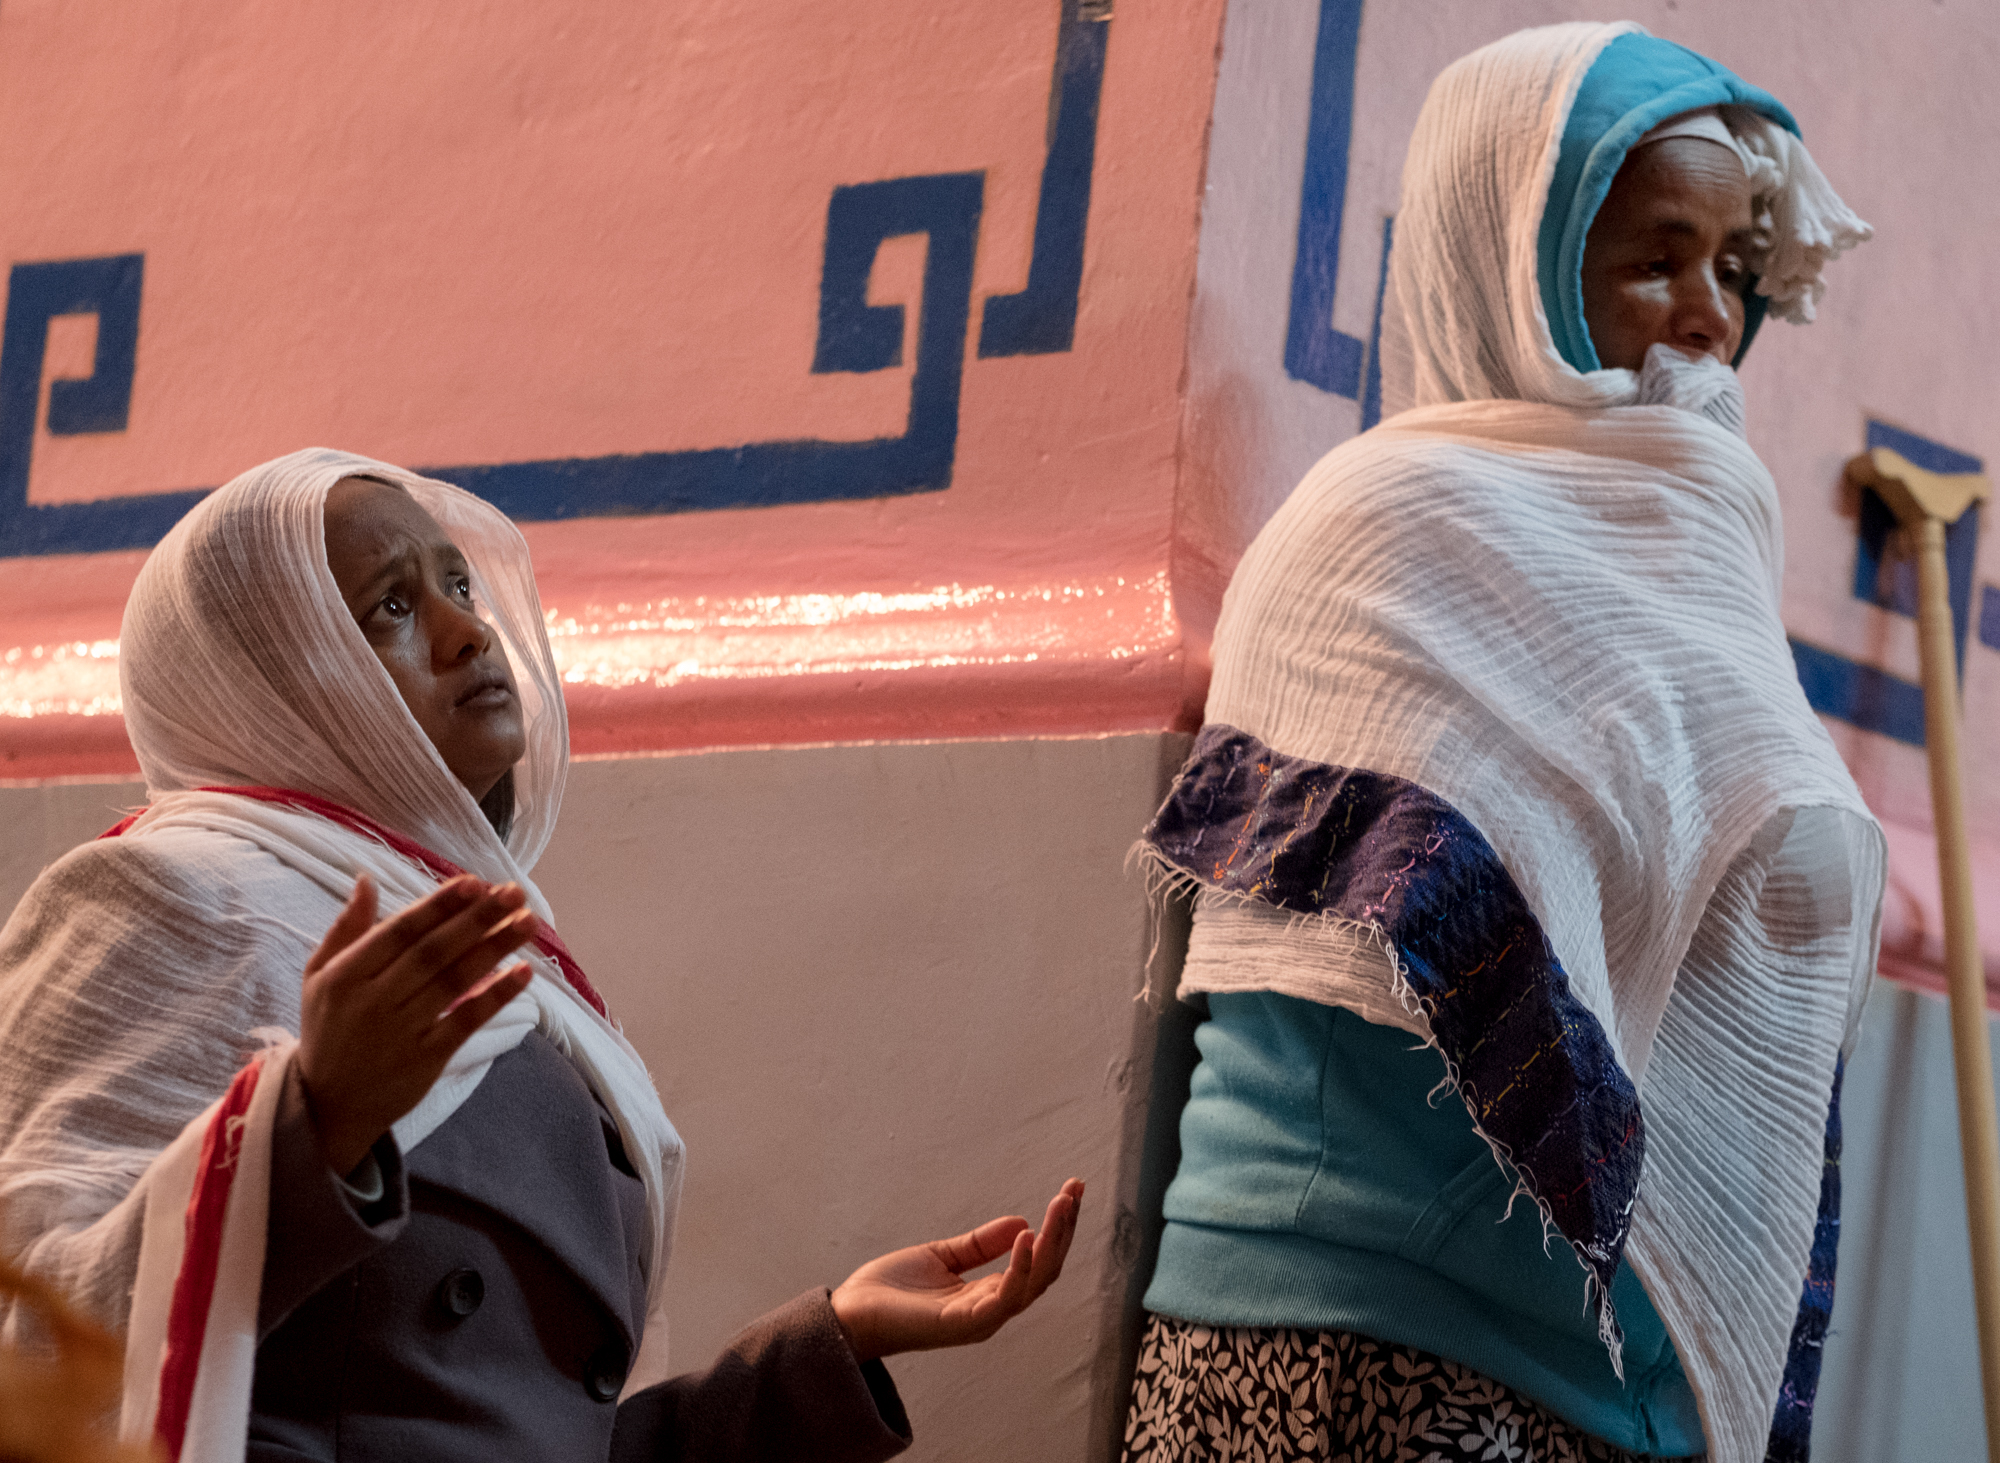 Ethiopian women pray during a service for the World Week of Christian Unity.